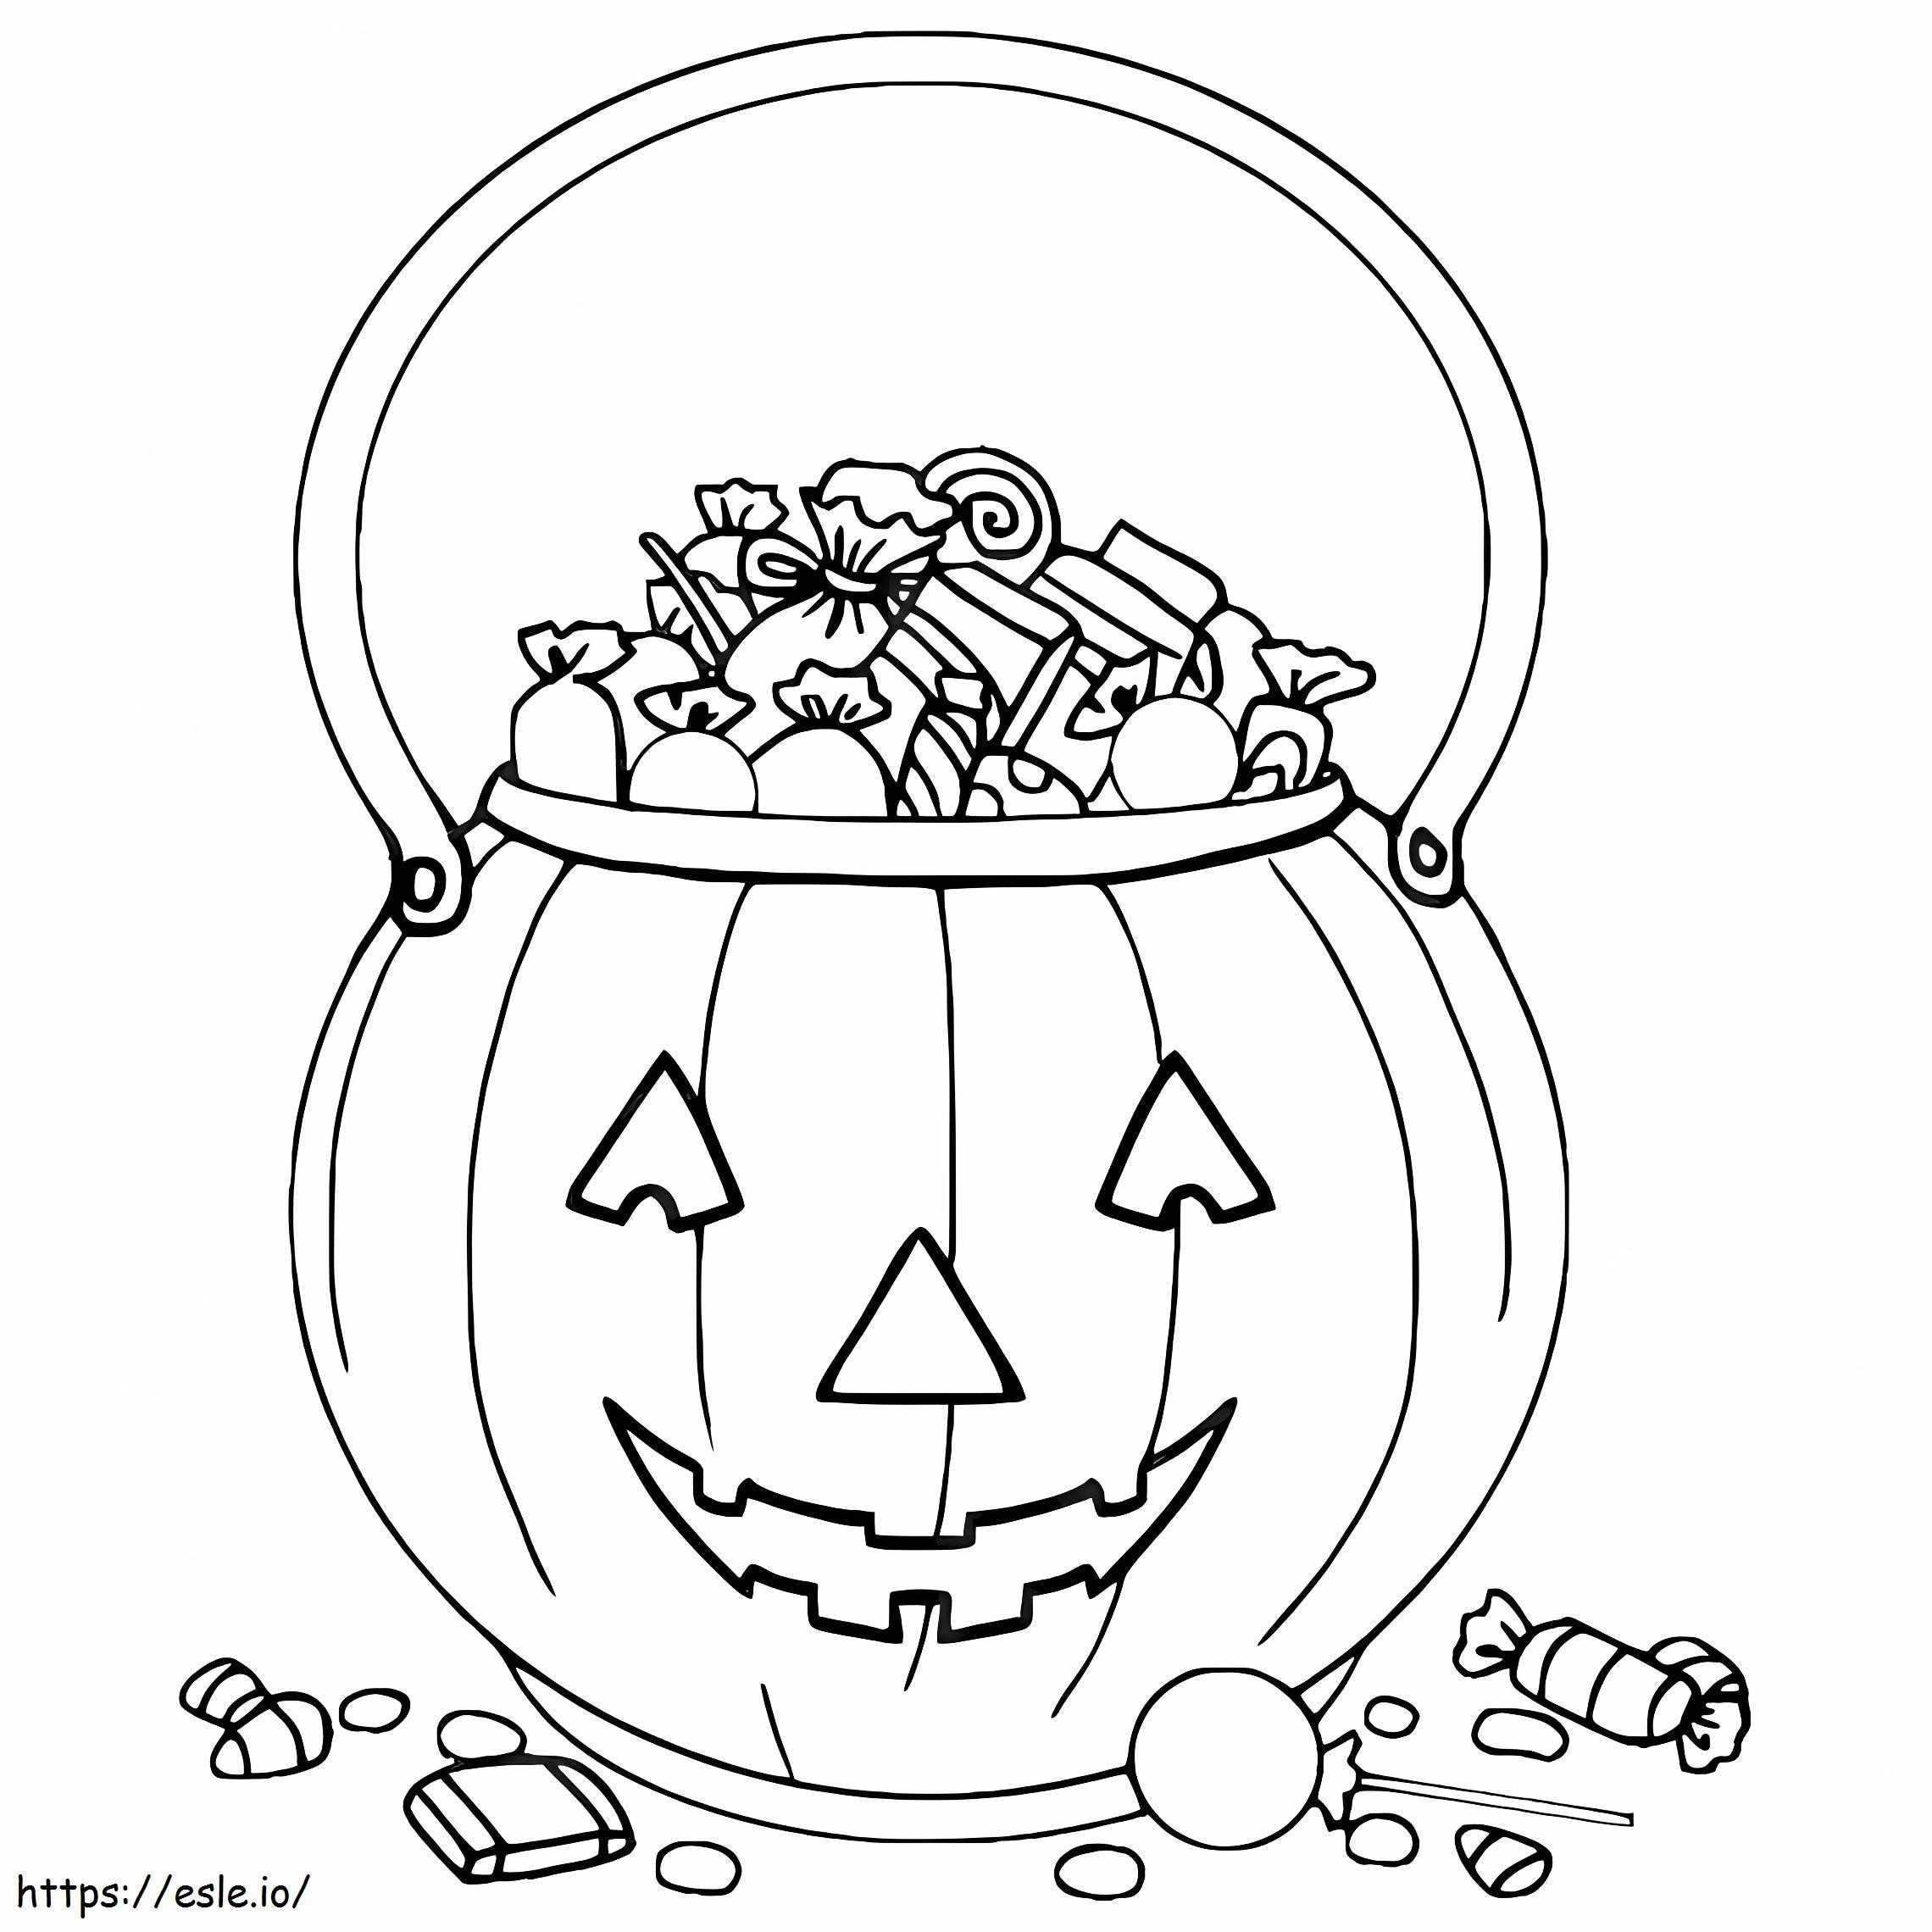 1539684442 Trick Or Treat Bag Off Marley Pages coloring page